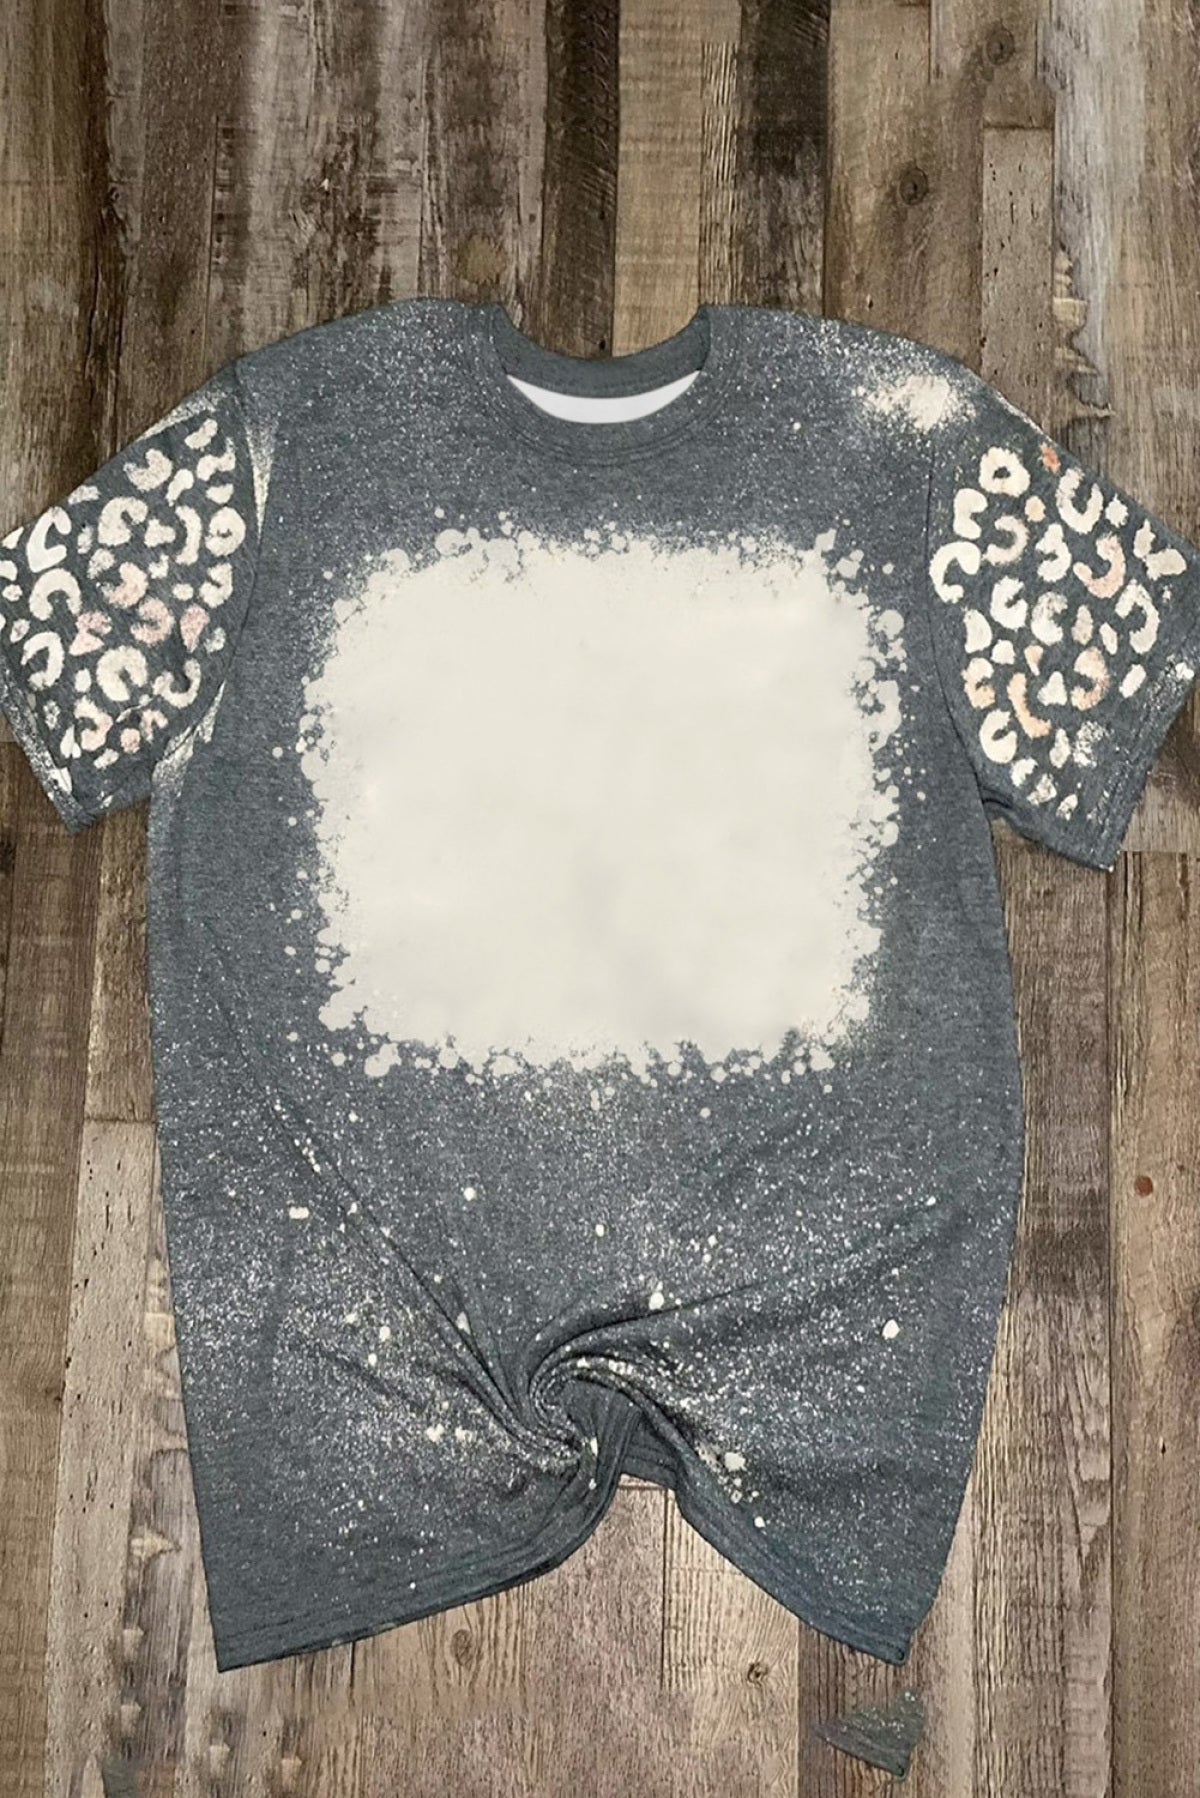 Gray Leopard Bleached Graphic T Shirt